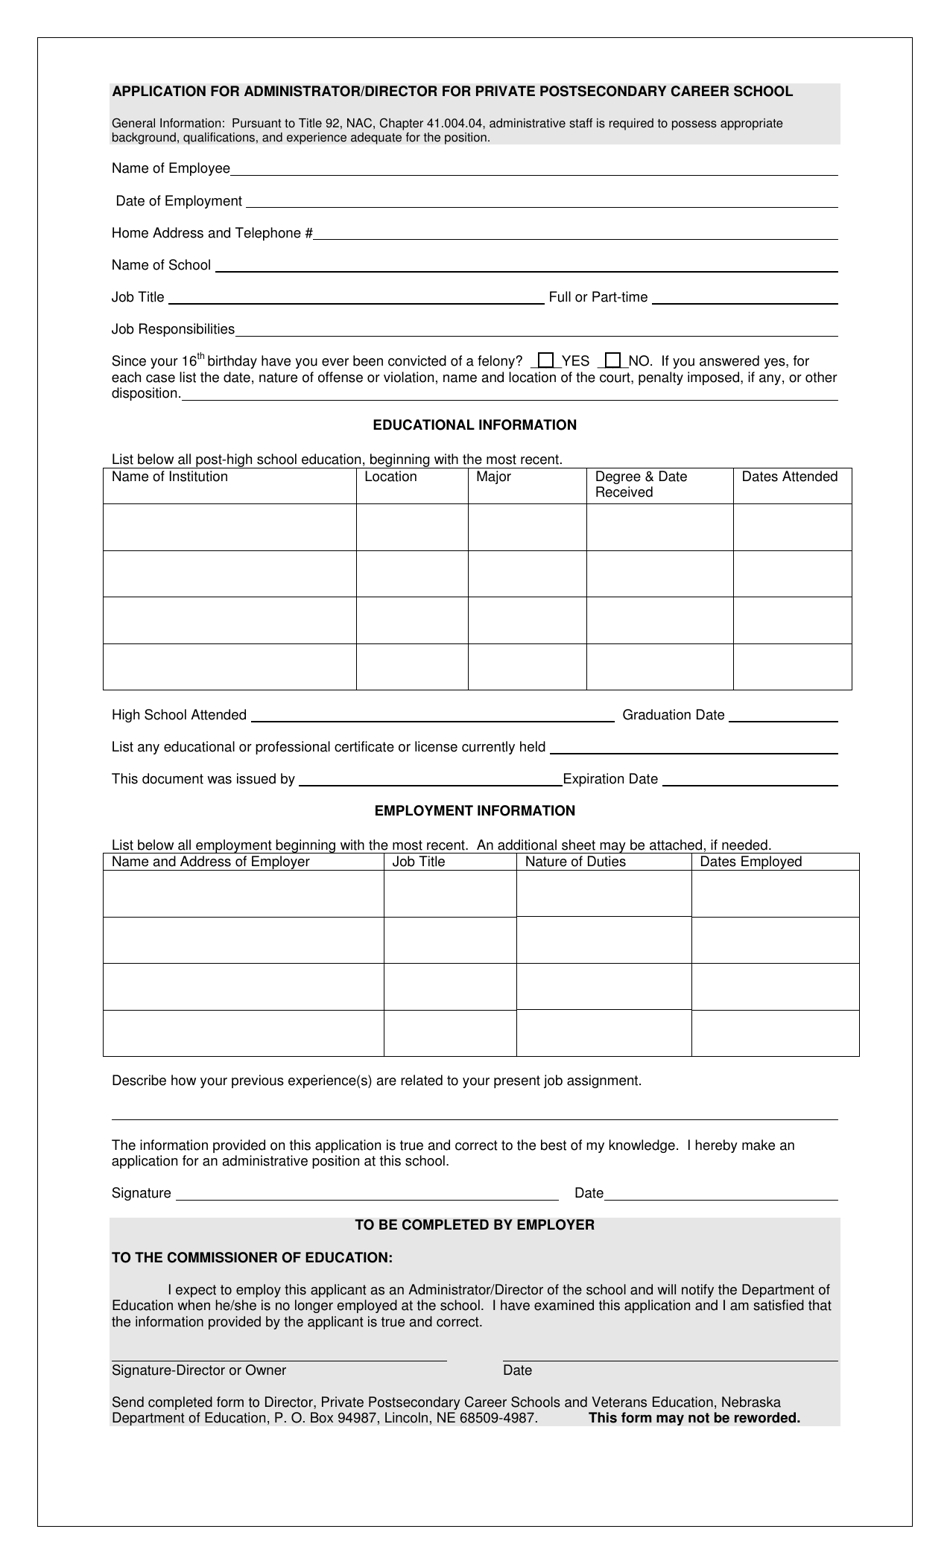 Application for Administrator / Director for Private Postsecondary Career School - Nebraska, Page 1